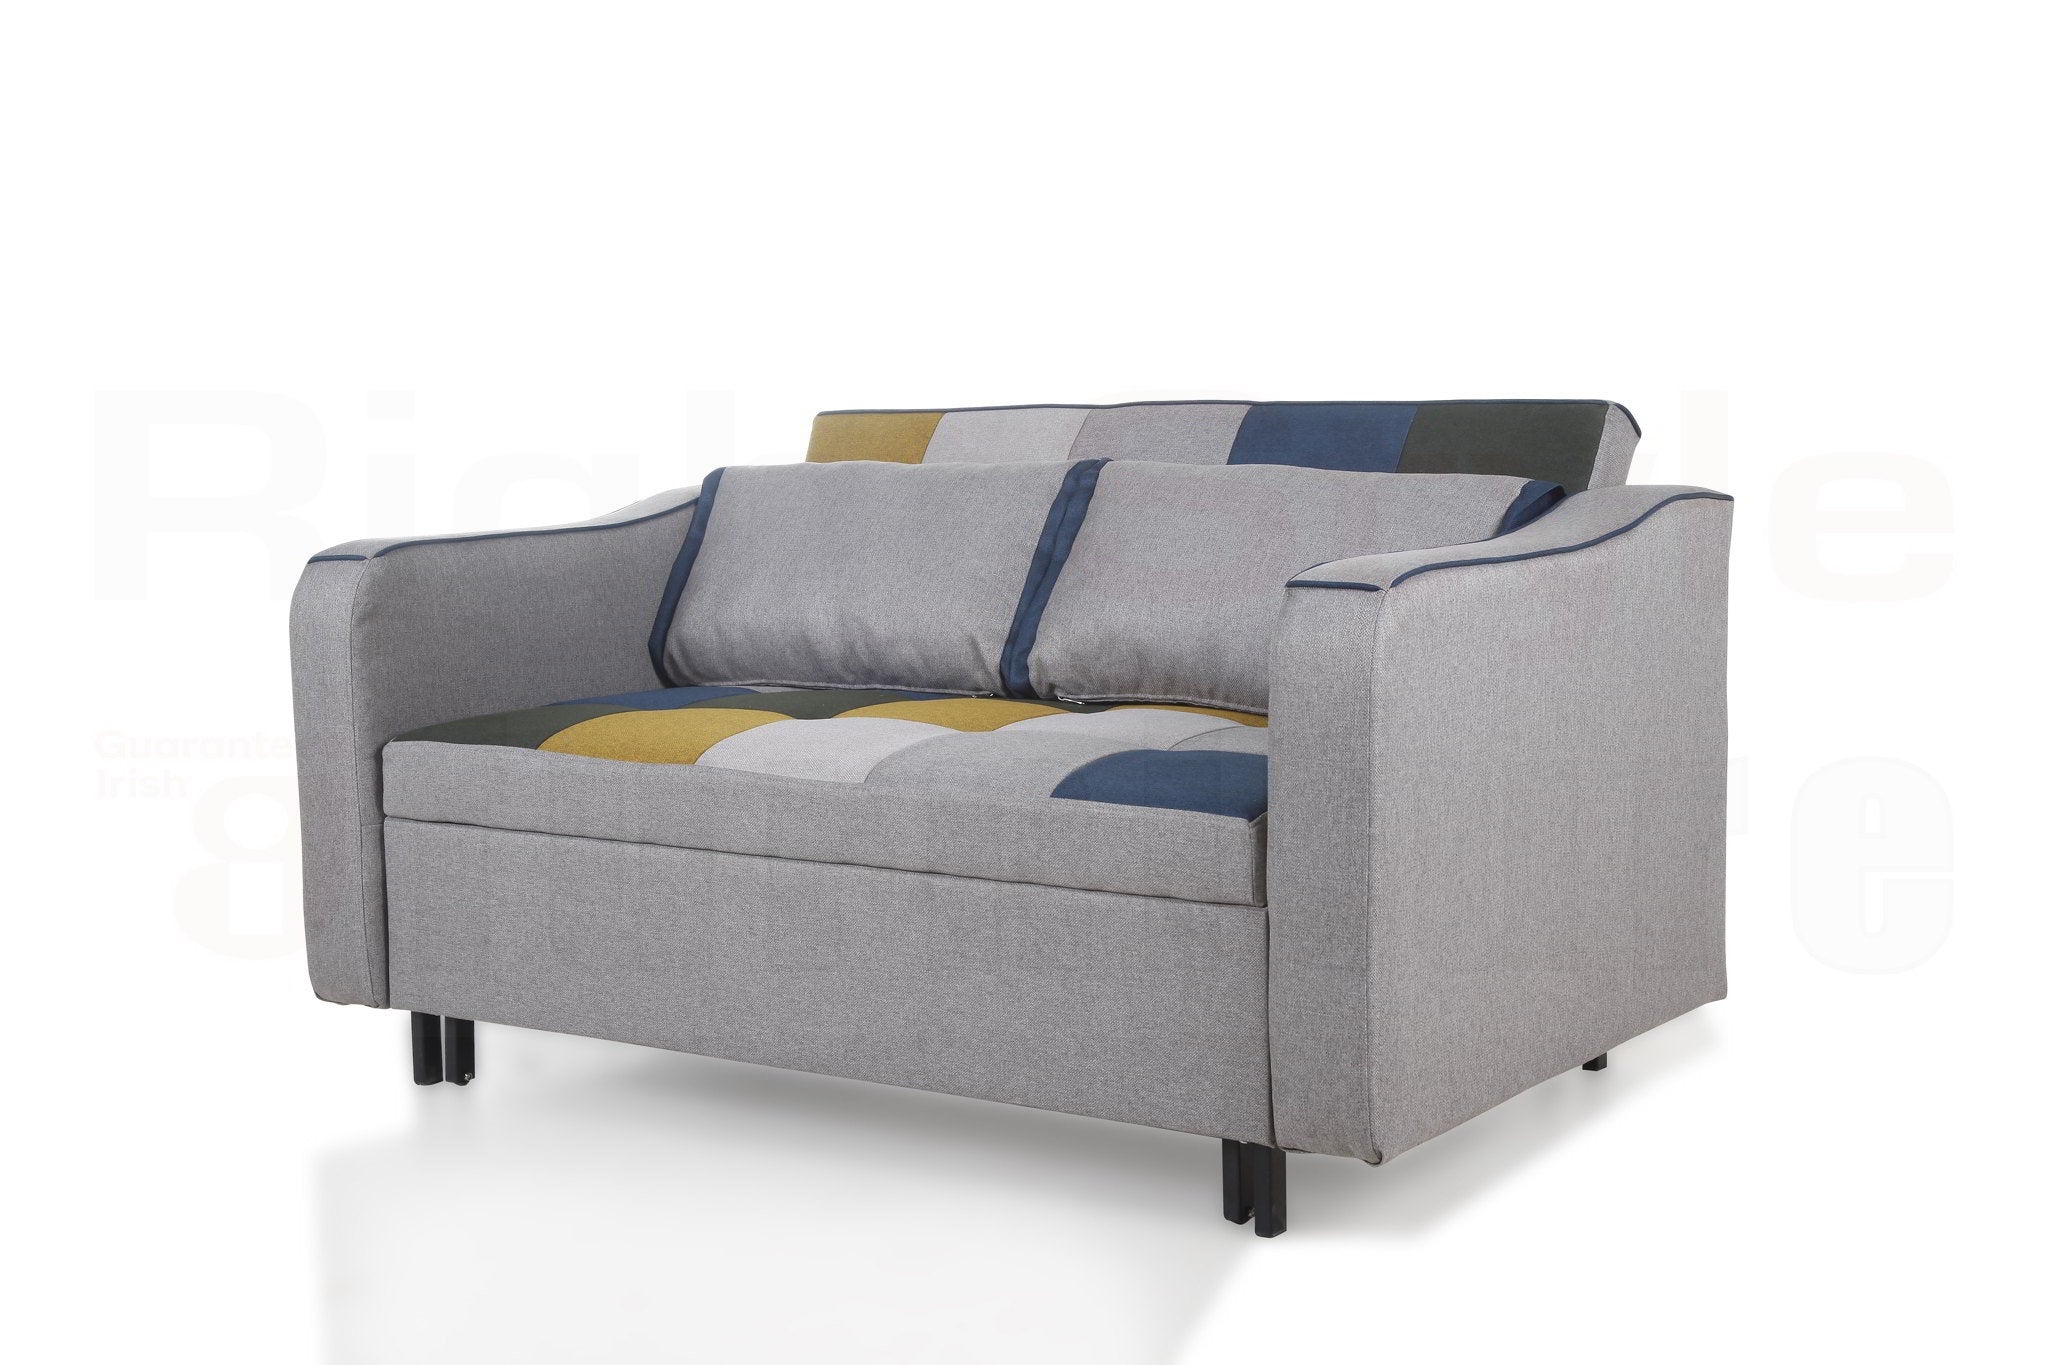 Aspen Sofa Bed Patchwork And Solid